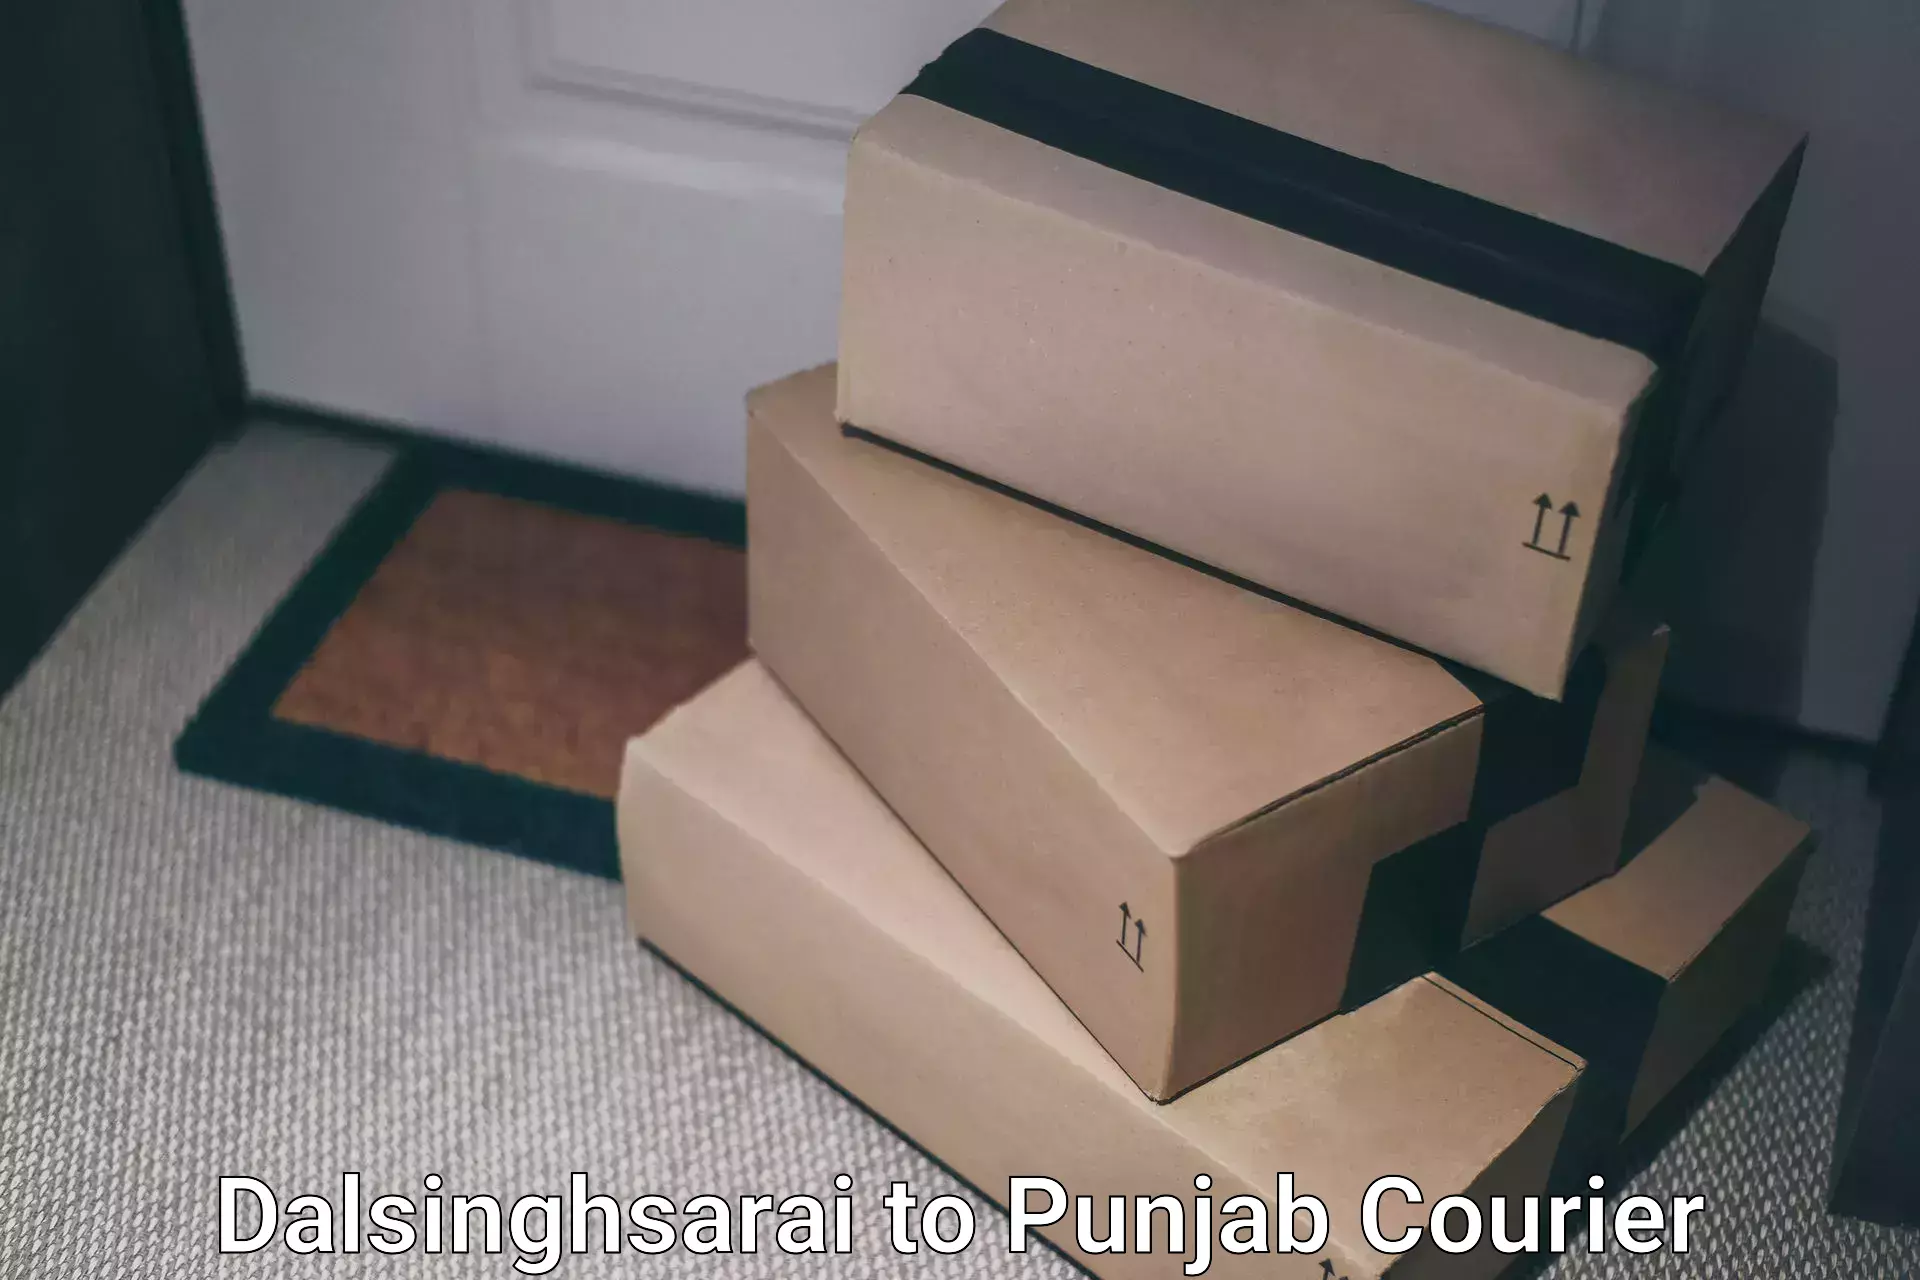 Express courier capabilities Dalsinghsarai to Amritsar